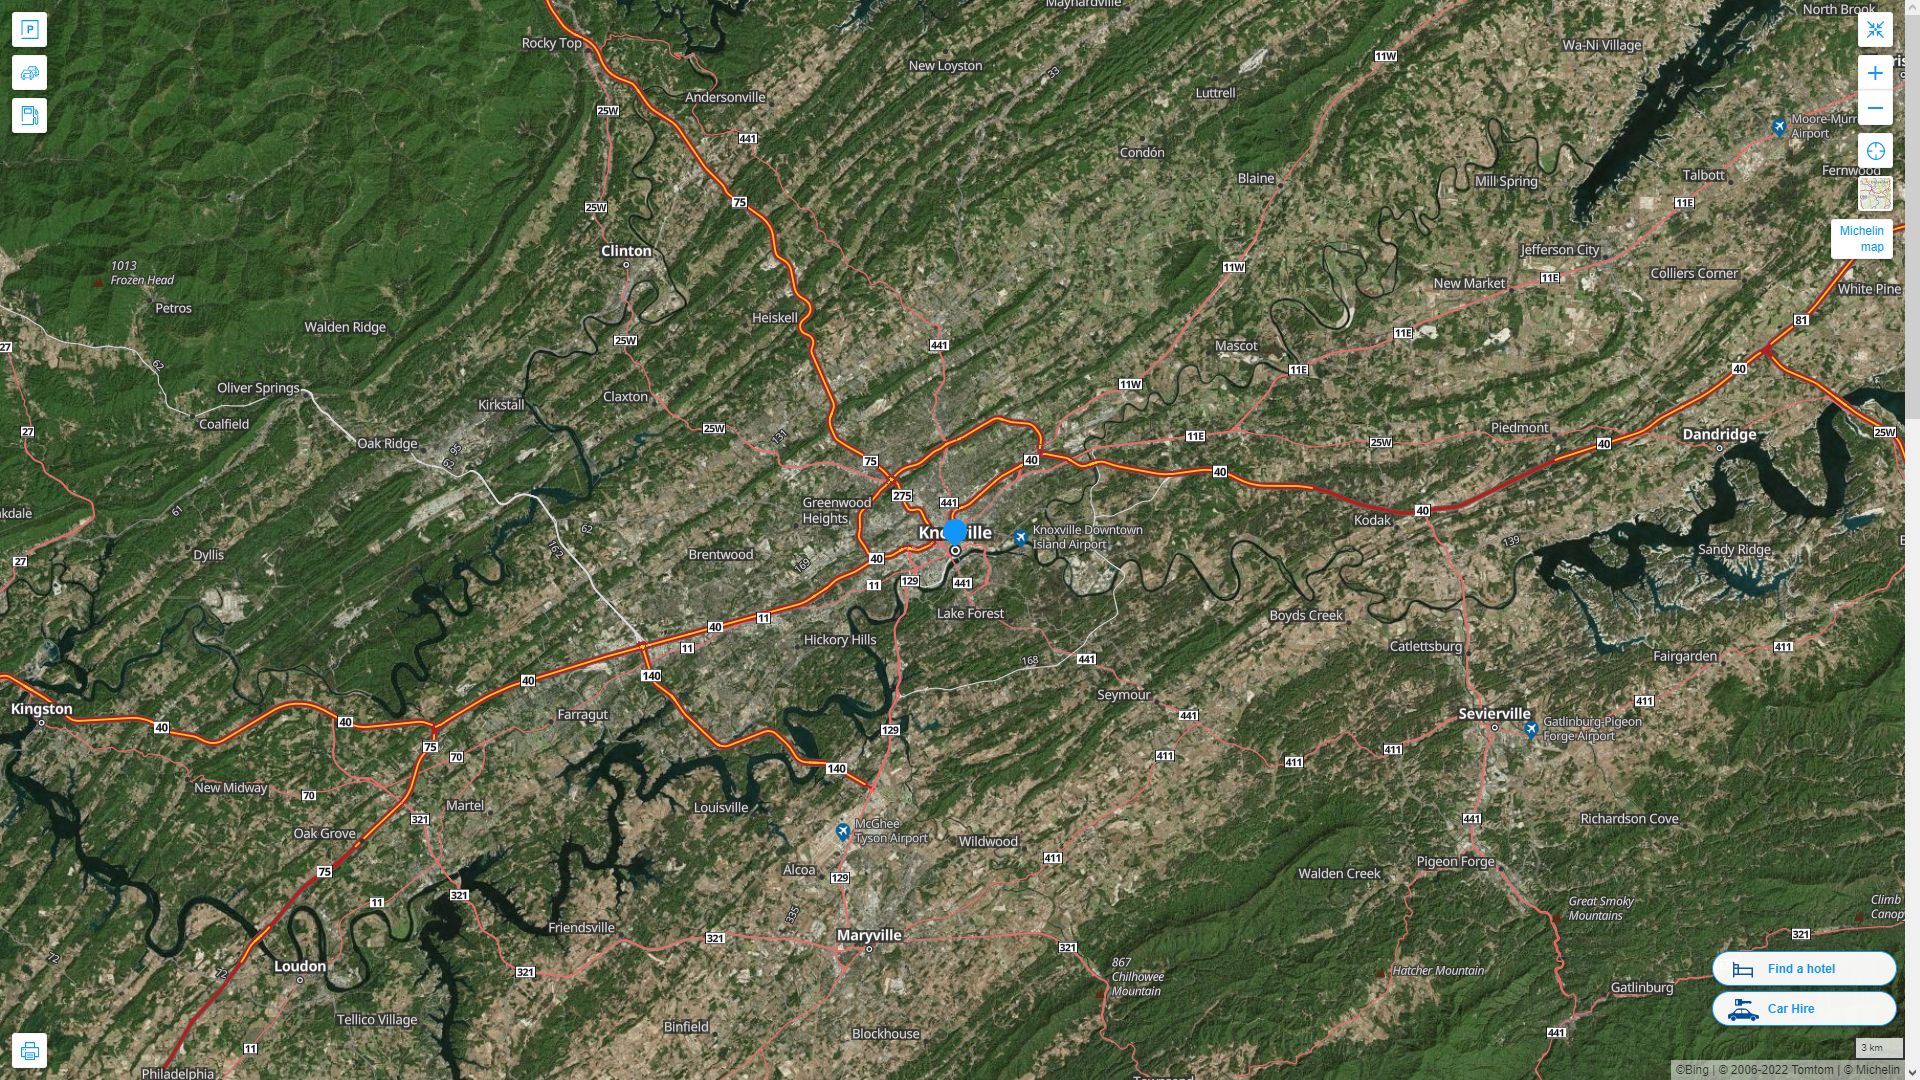 Knoxville Tennessee Highway and Road Map with Satellite View